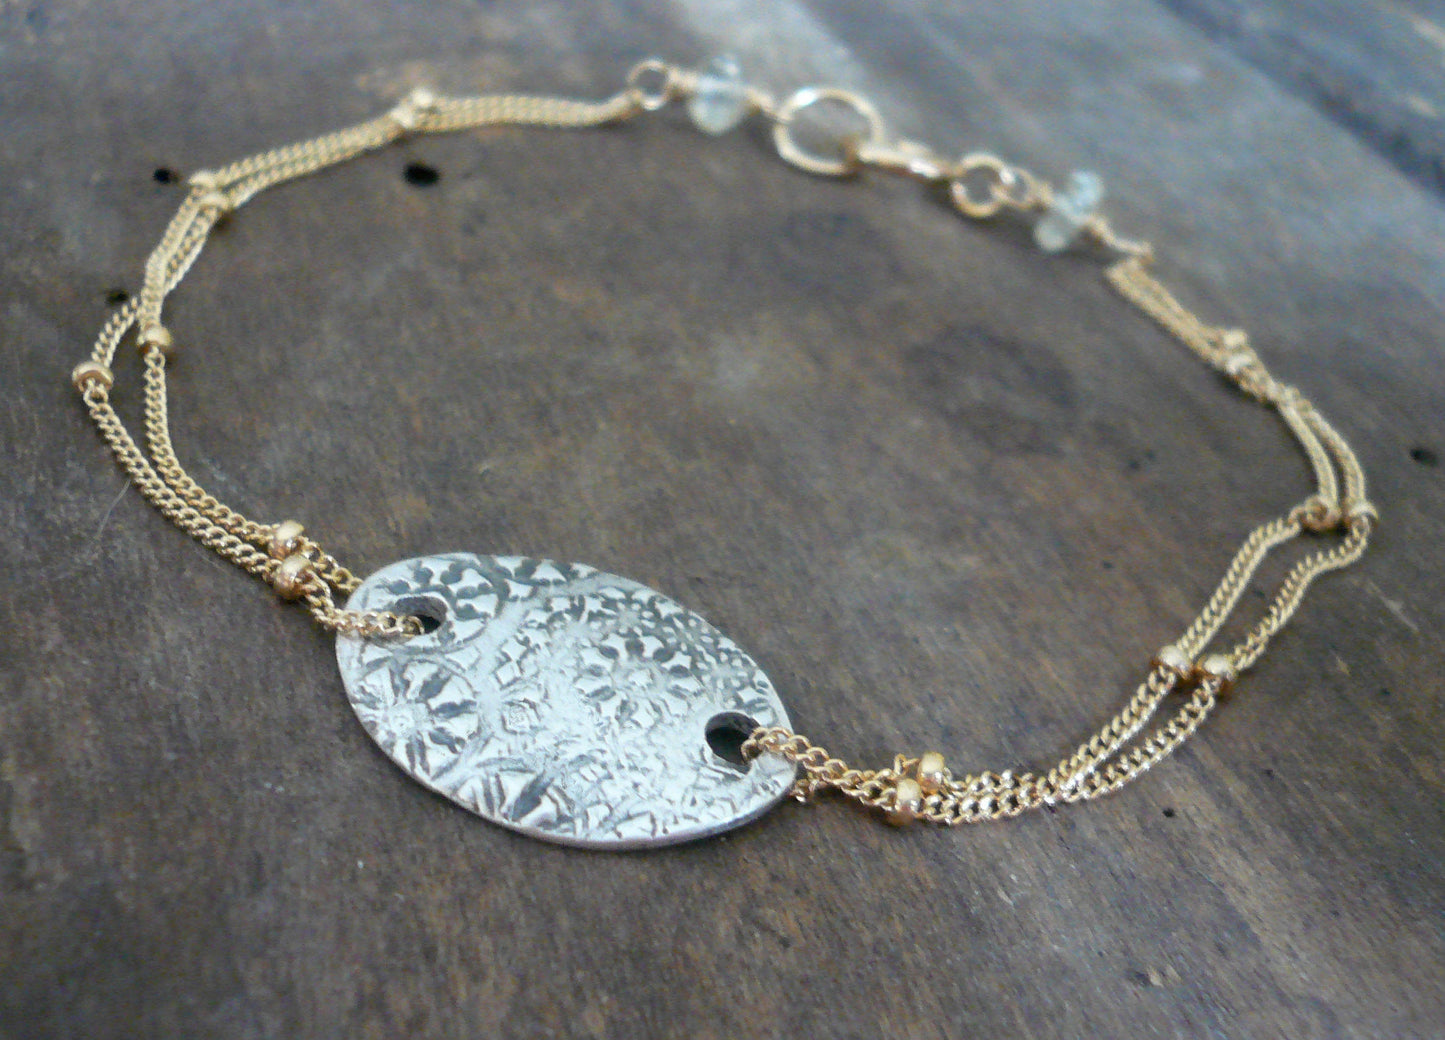 Soleil Collection Bracelet- Oxidized fine silver. 14kt Goldfill. Mixed Metals. Handmade